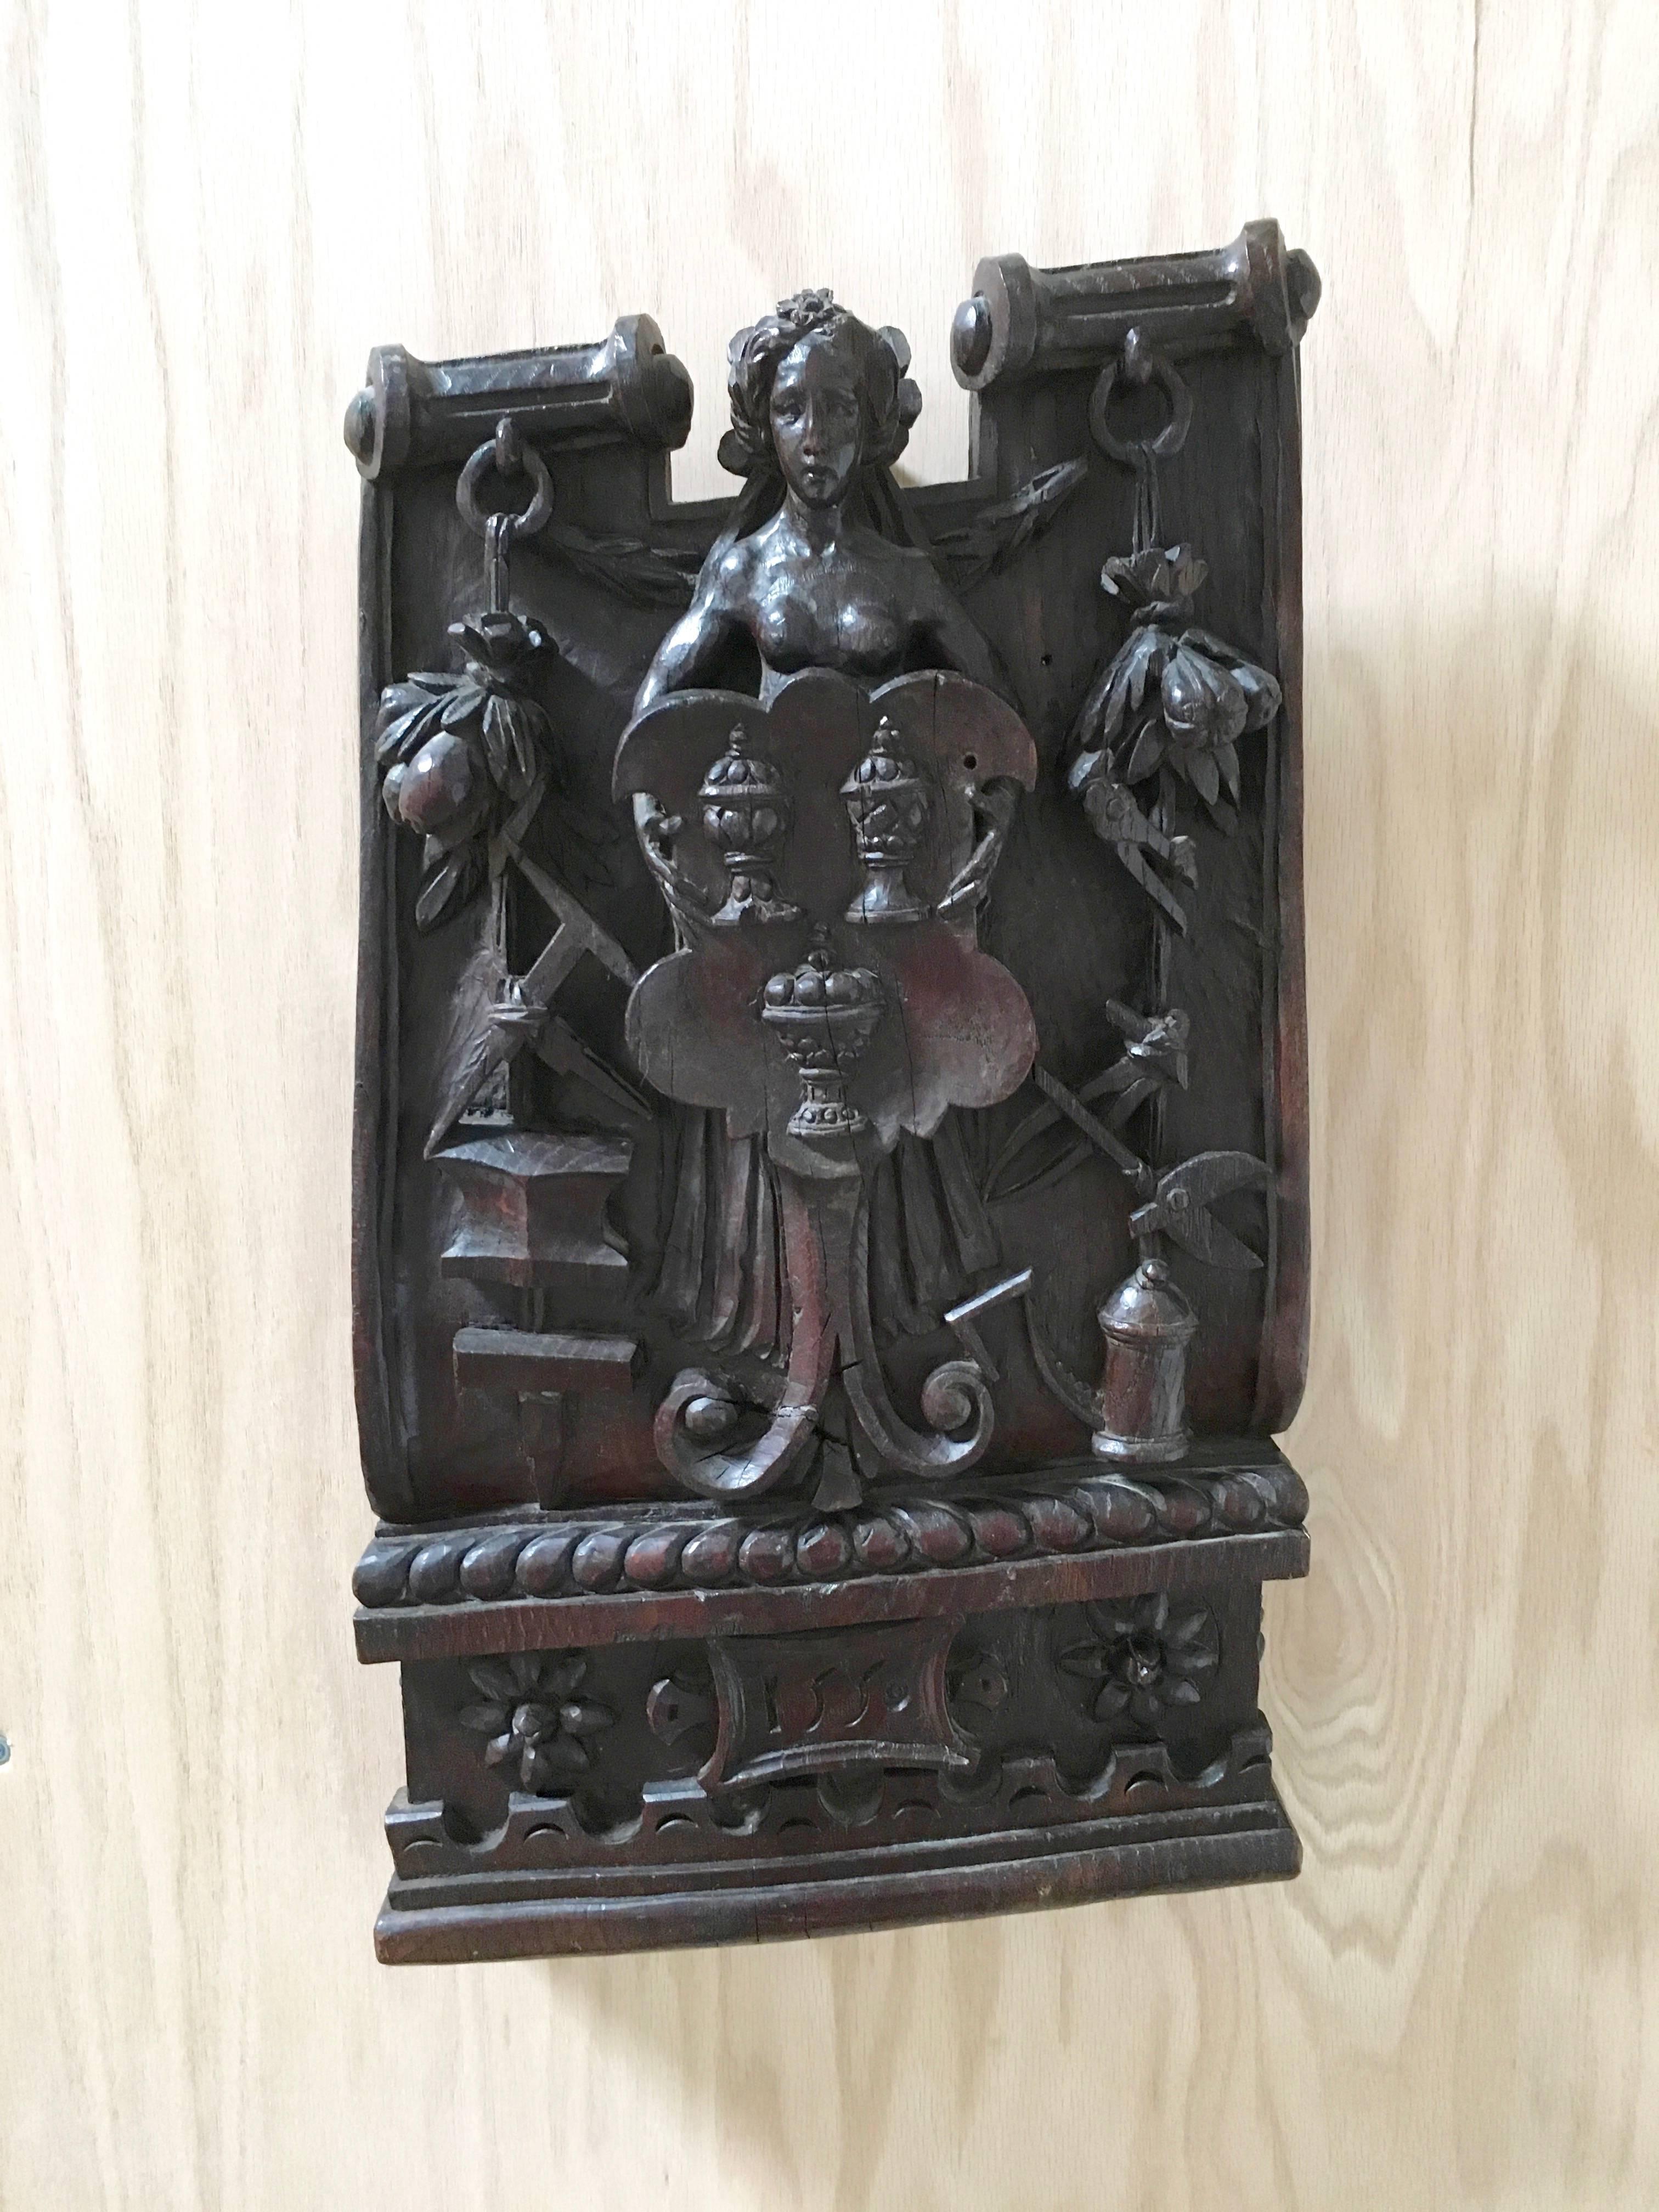 Antique16th century hand-carved panel from France with intricate detail.